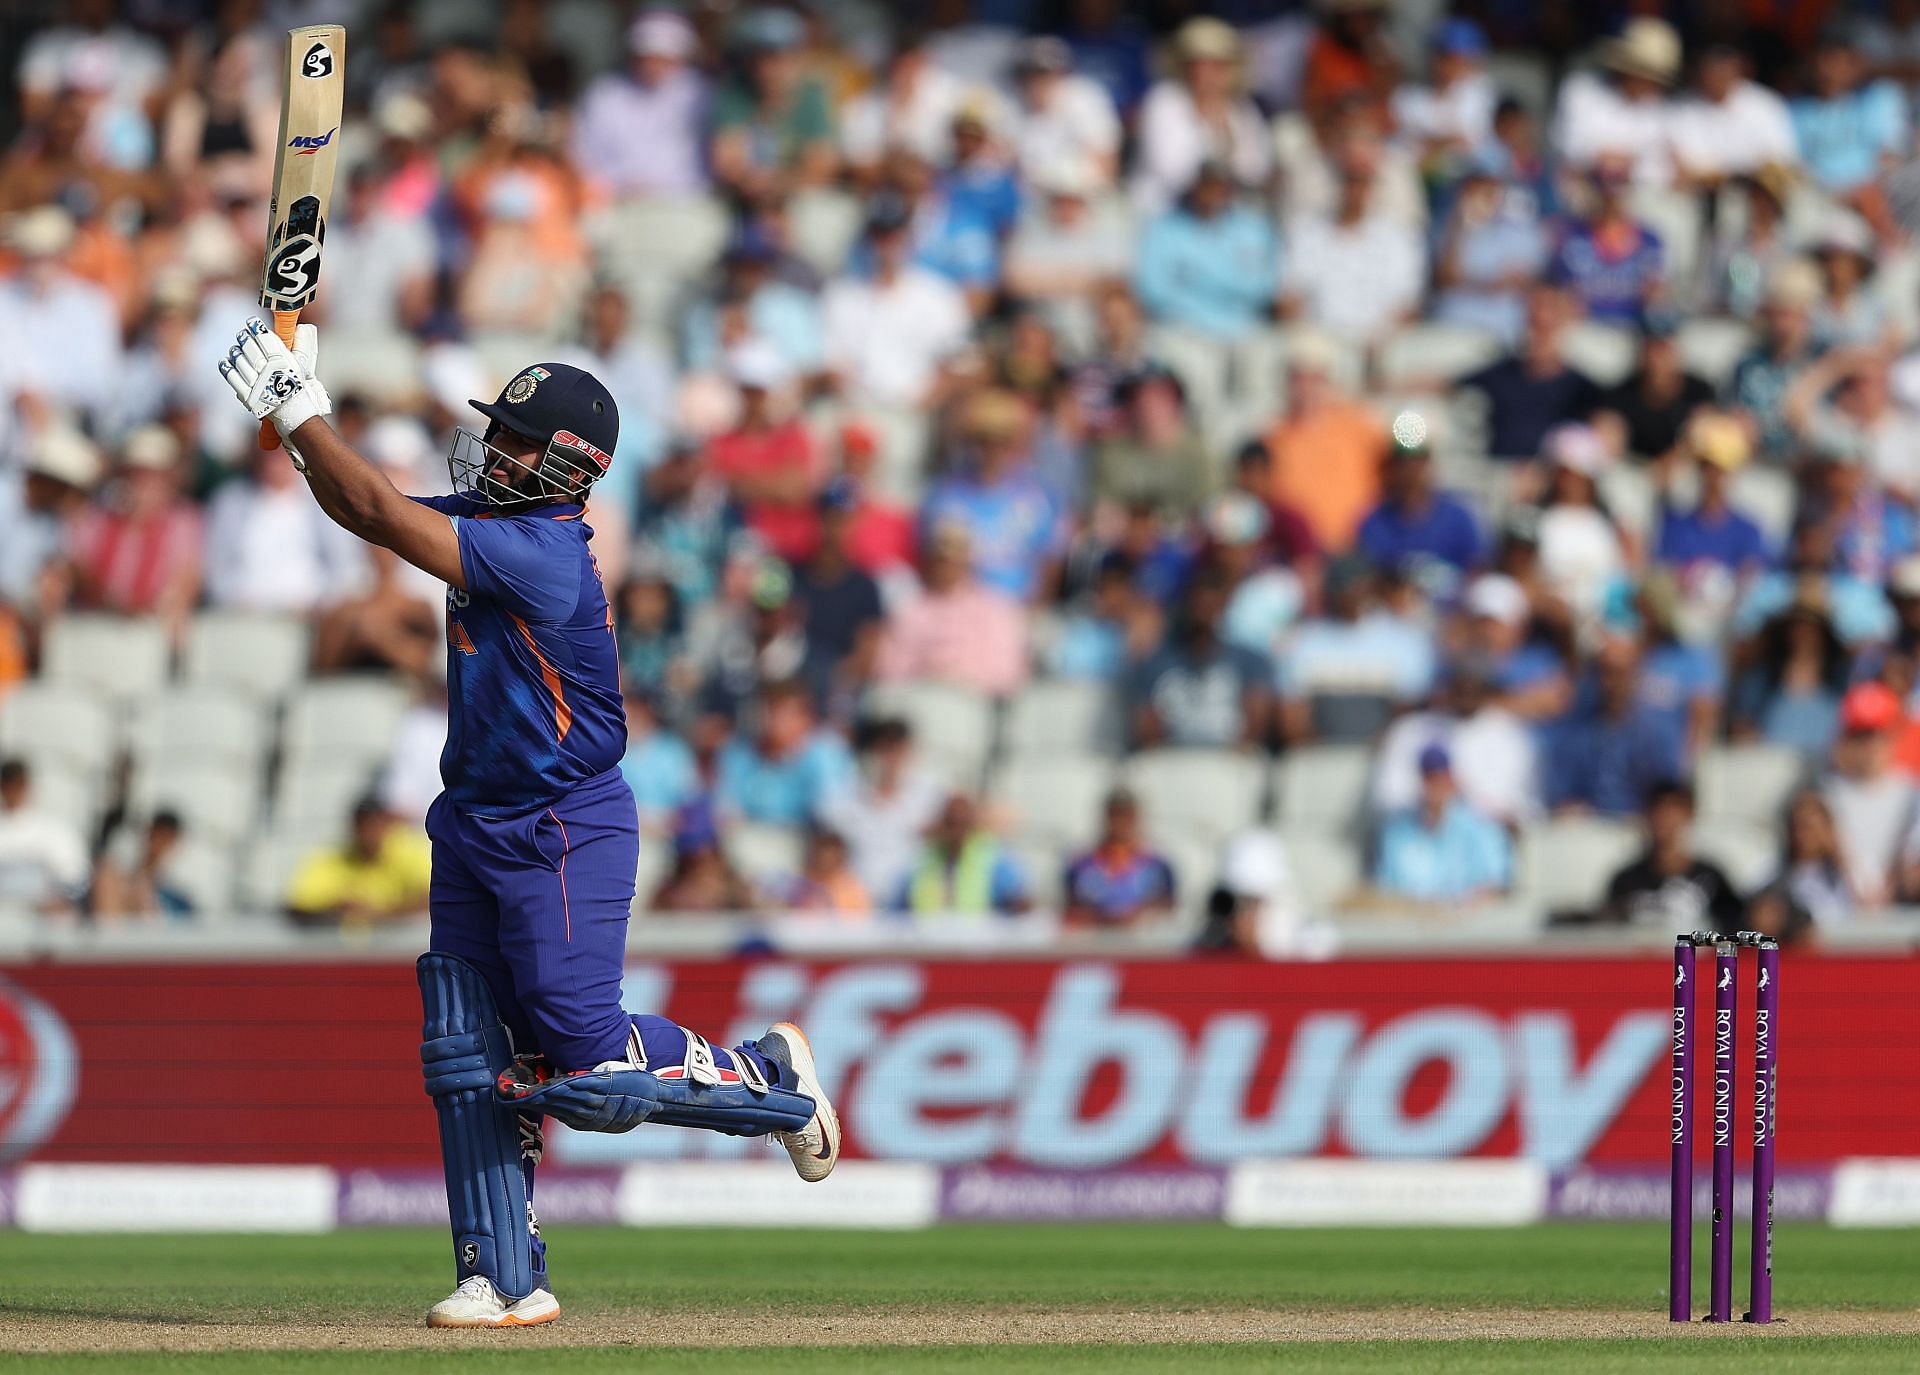 Rishabh Pant scored an unbeaten 125 off 113 deliveries in the third ODI against England